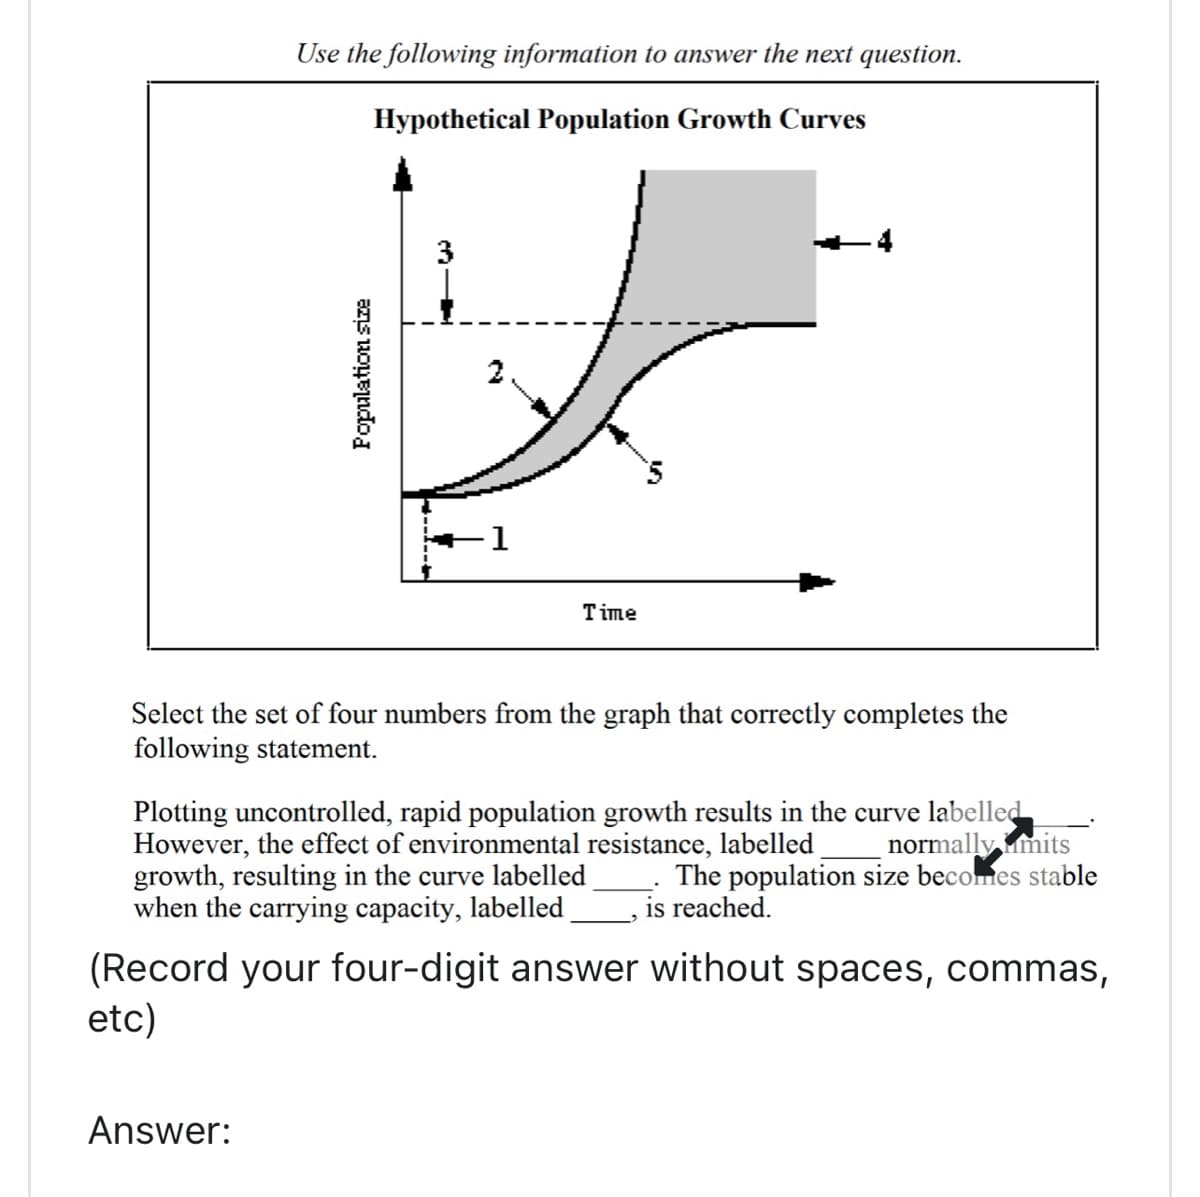 Use the following information to answer the next question.
Hypothetical Population Growth Curves
Population size
Answer:
3
1
Time
-4
Select the set of four numbers from the graph that correctly completes the
following statement.
Plotting uncontrolled, rapid population growth results in the curve labelled
However, the effect of environmental resistance, labelled normally mits
growth, resulting in the curve labelled The population size becomes stable
when the carrying capacity, labelled is reached.
(Record your four-digit answer without spaces, commas,
etc)